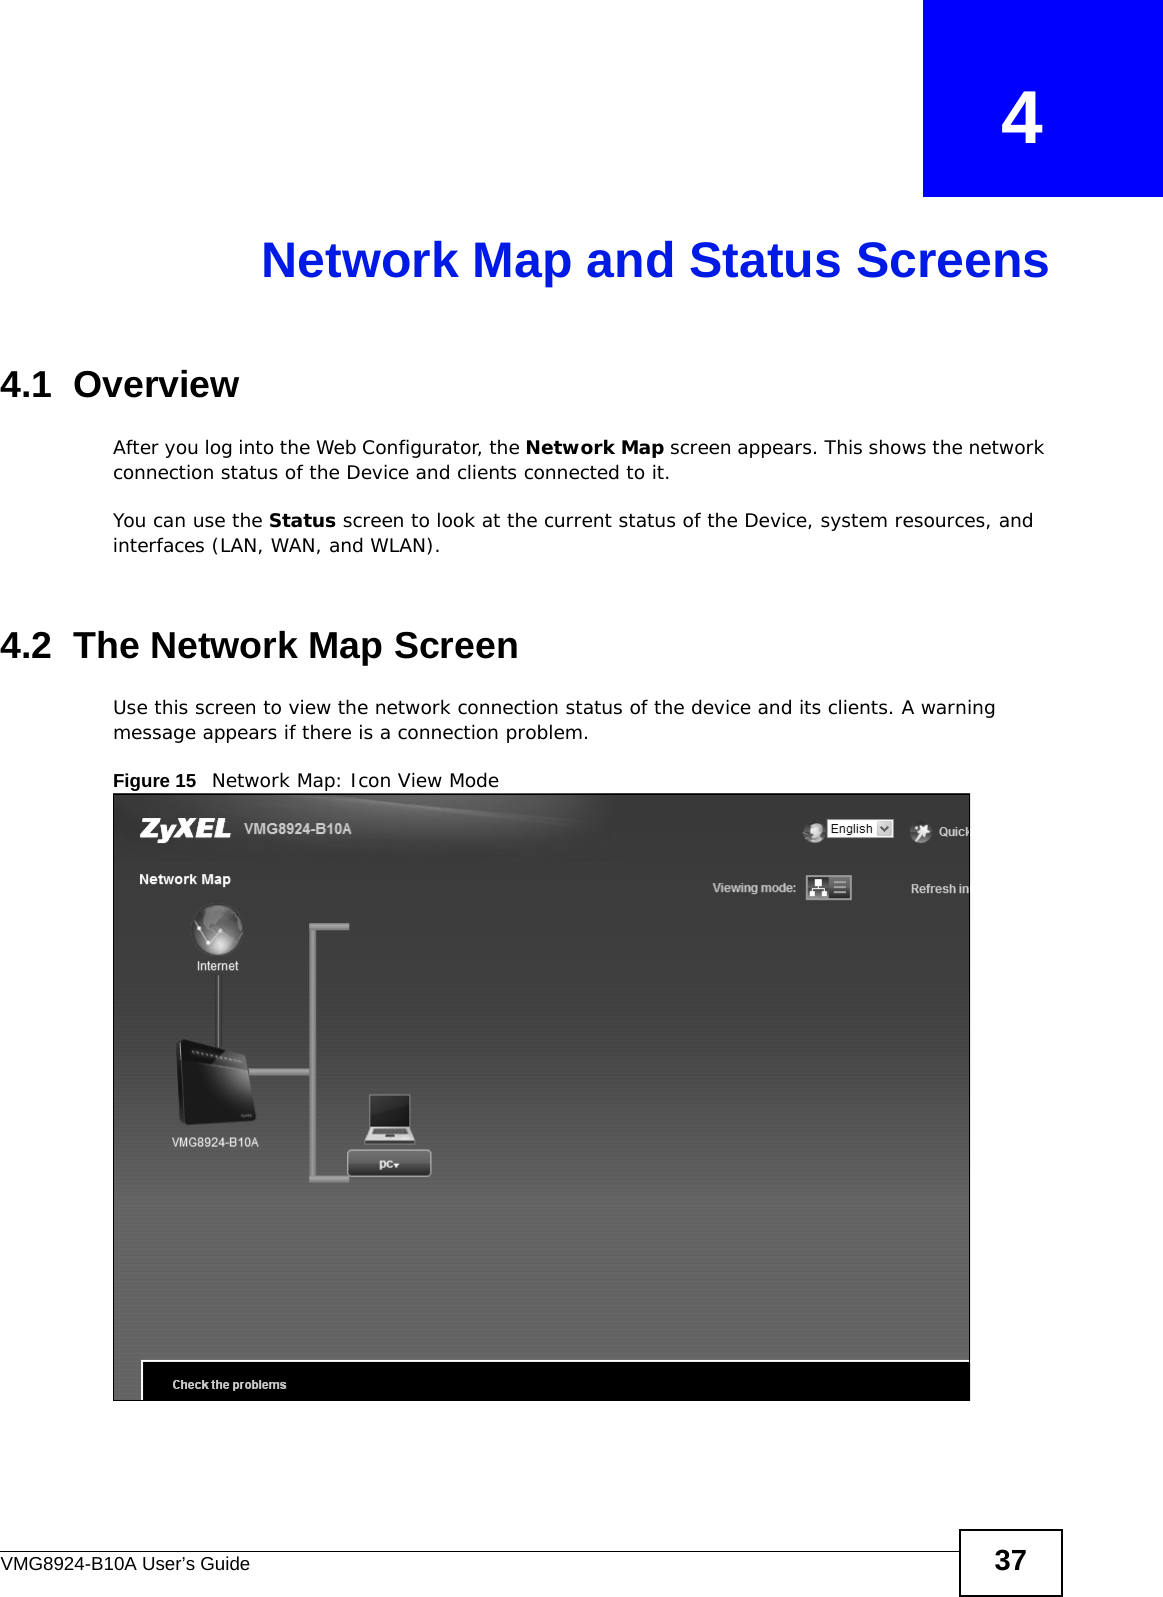 VMG8924-B10A User’s Guide 37CHAPTER   4Network Map and Status Screens4.1  OverviewAfter you log into the Web Configurator, the Network Map screen appears. This shows the network connection status of the Device and clients connected to it. You can use the Status screen to look at the current status of the Device, system resources, and interfaces (LAN, WAN, and WLAN). 4.2  The Network Map ScreenUse this screen to view the network connection status of the device and its clients. A warning message appears if there is a connection problem. Figure 15   Network Map: Icon View Mode 